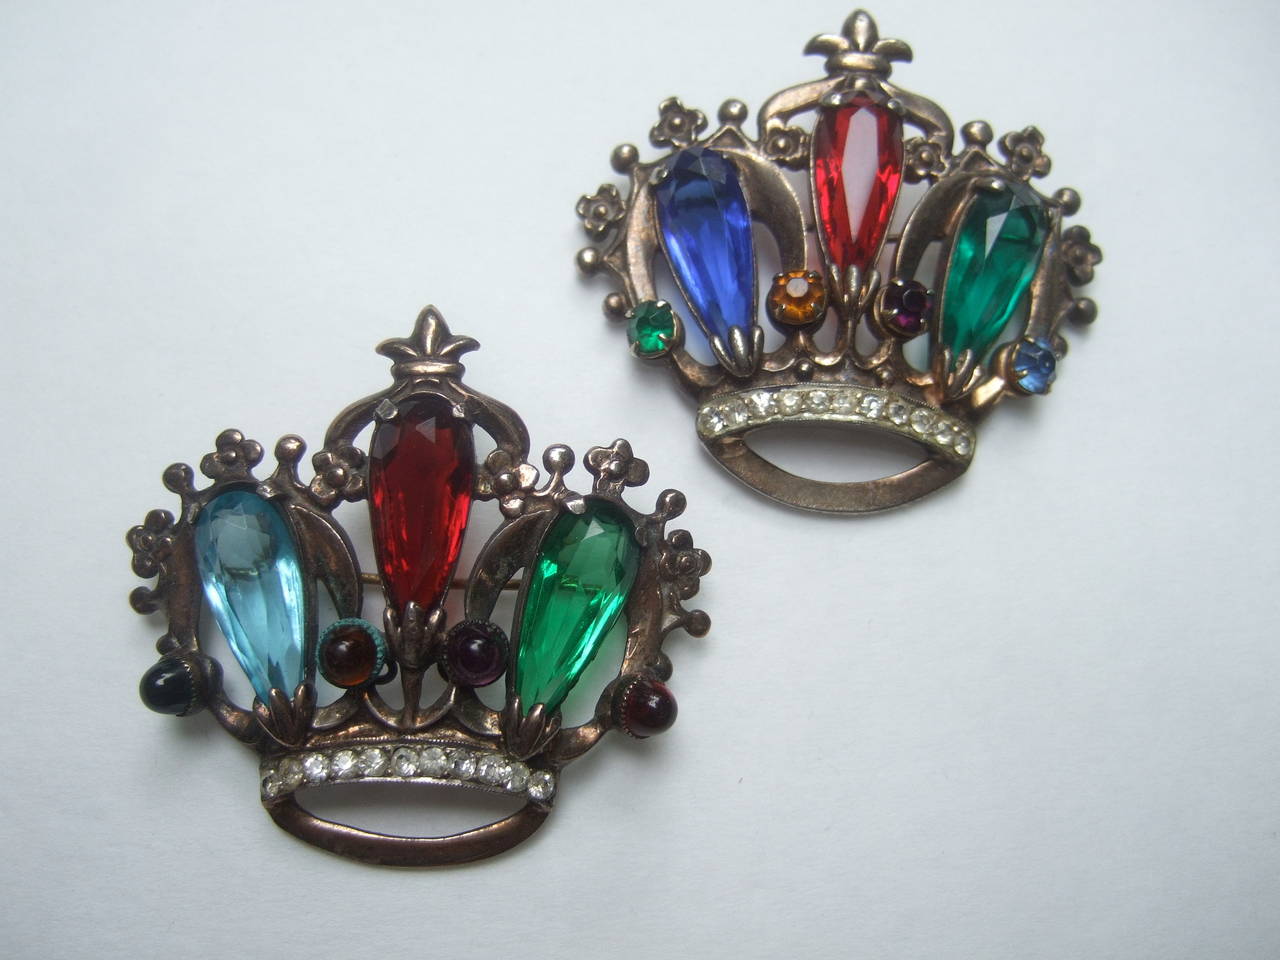 Sterling crystal pair of crown brooches c 1950
The elegant mid century brooches are embellished
with jewel tone crystals with diamante crystal accents 

The pair of sterling coronation crown brooches 
have a rose vermeil finish. The figural